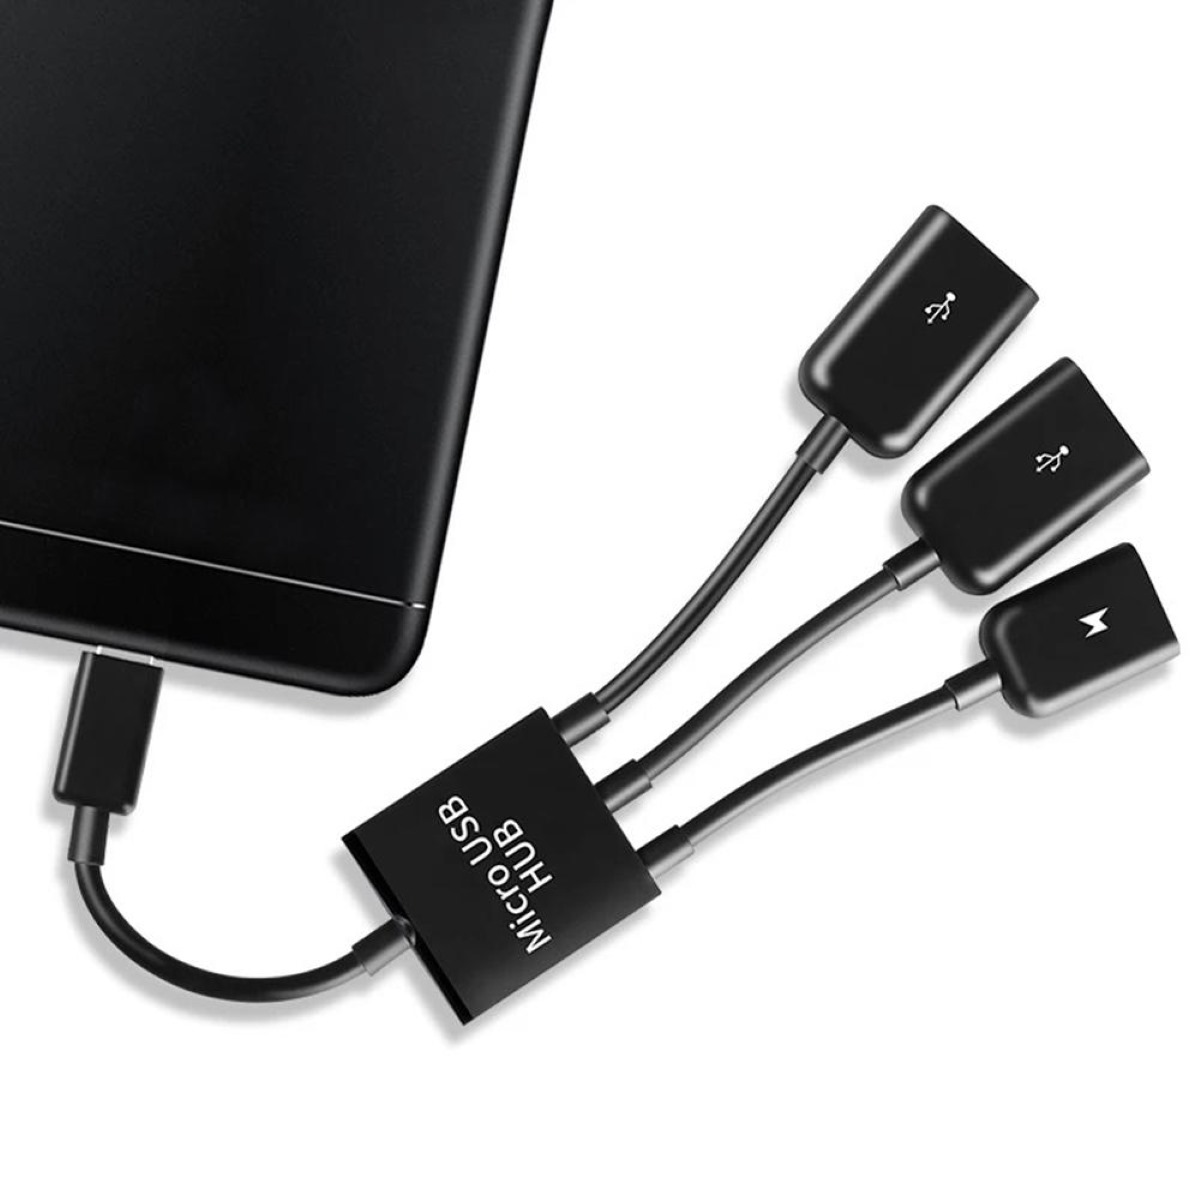 How To Use A USB Hub On Android